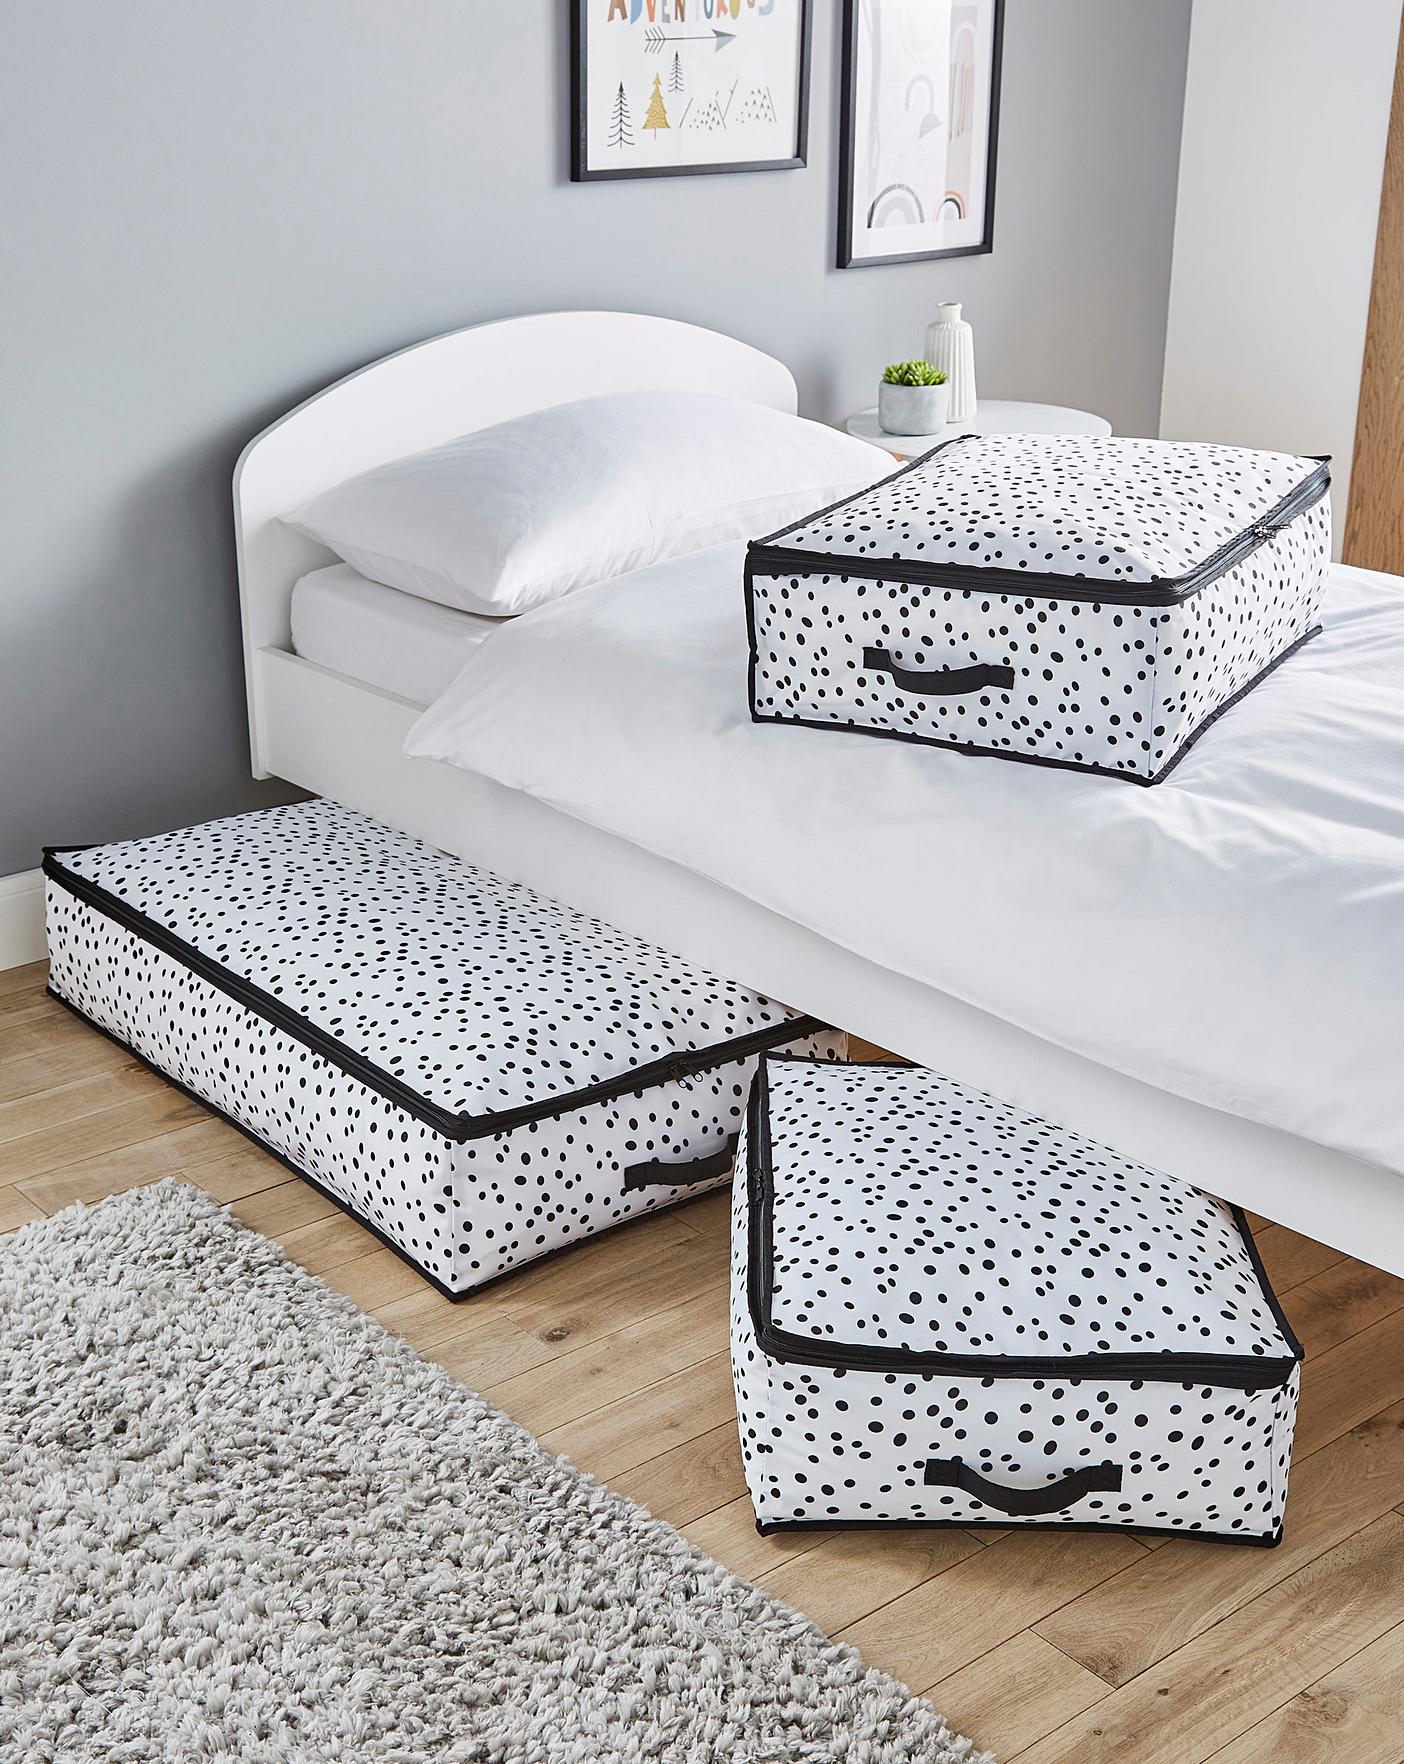 Set of 3 Spotty Underbed Storage Boxes | J D Williams